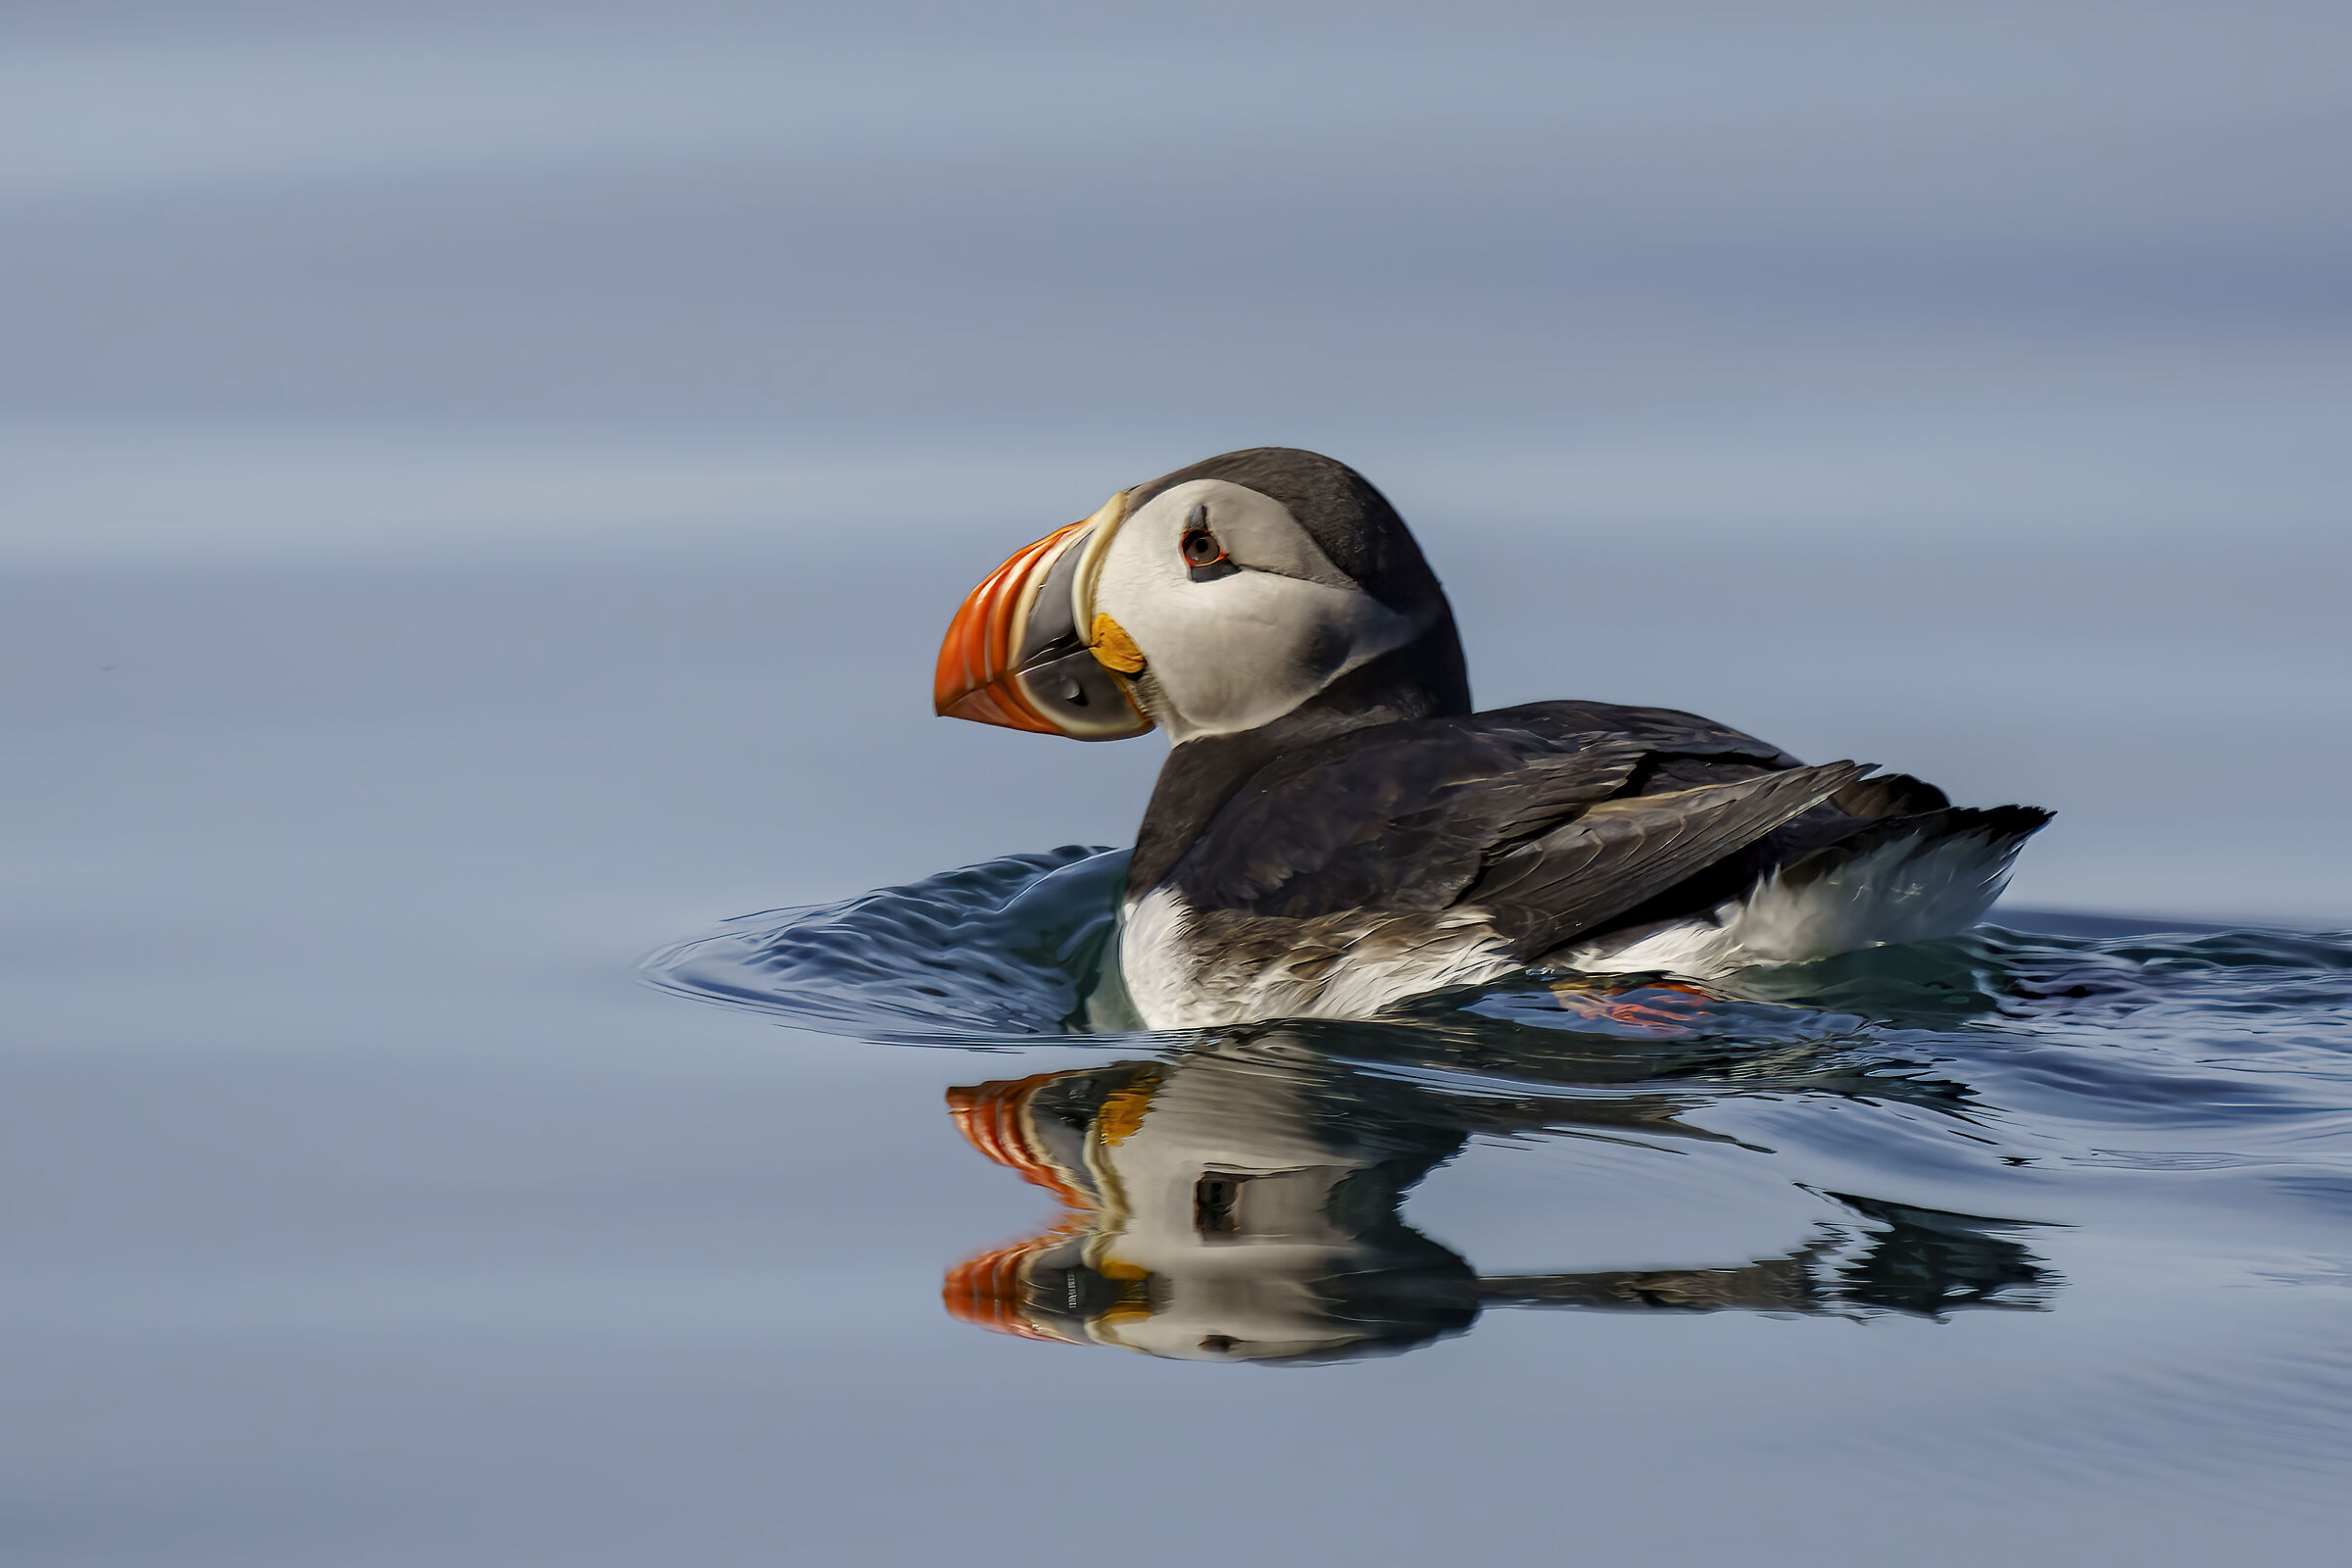 Puffin from the boat...